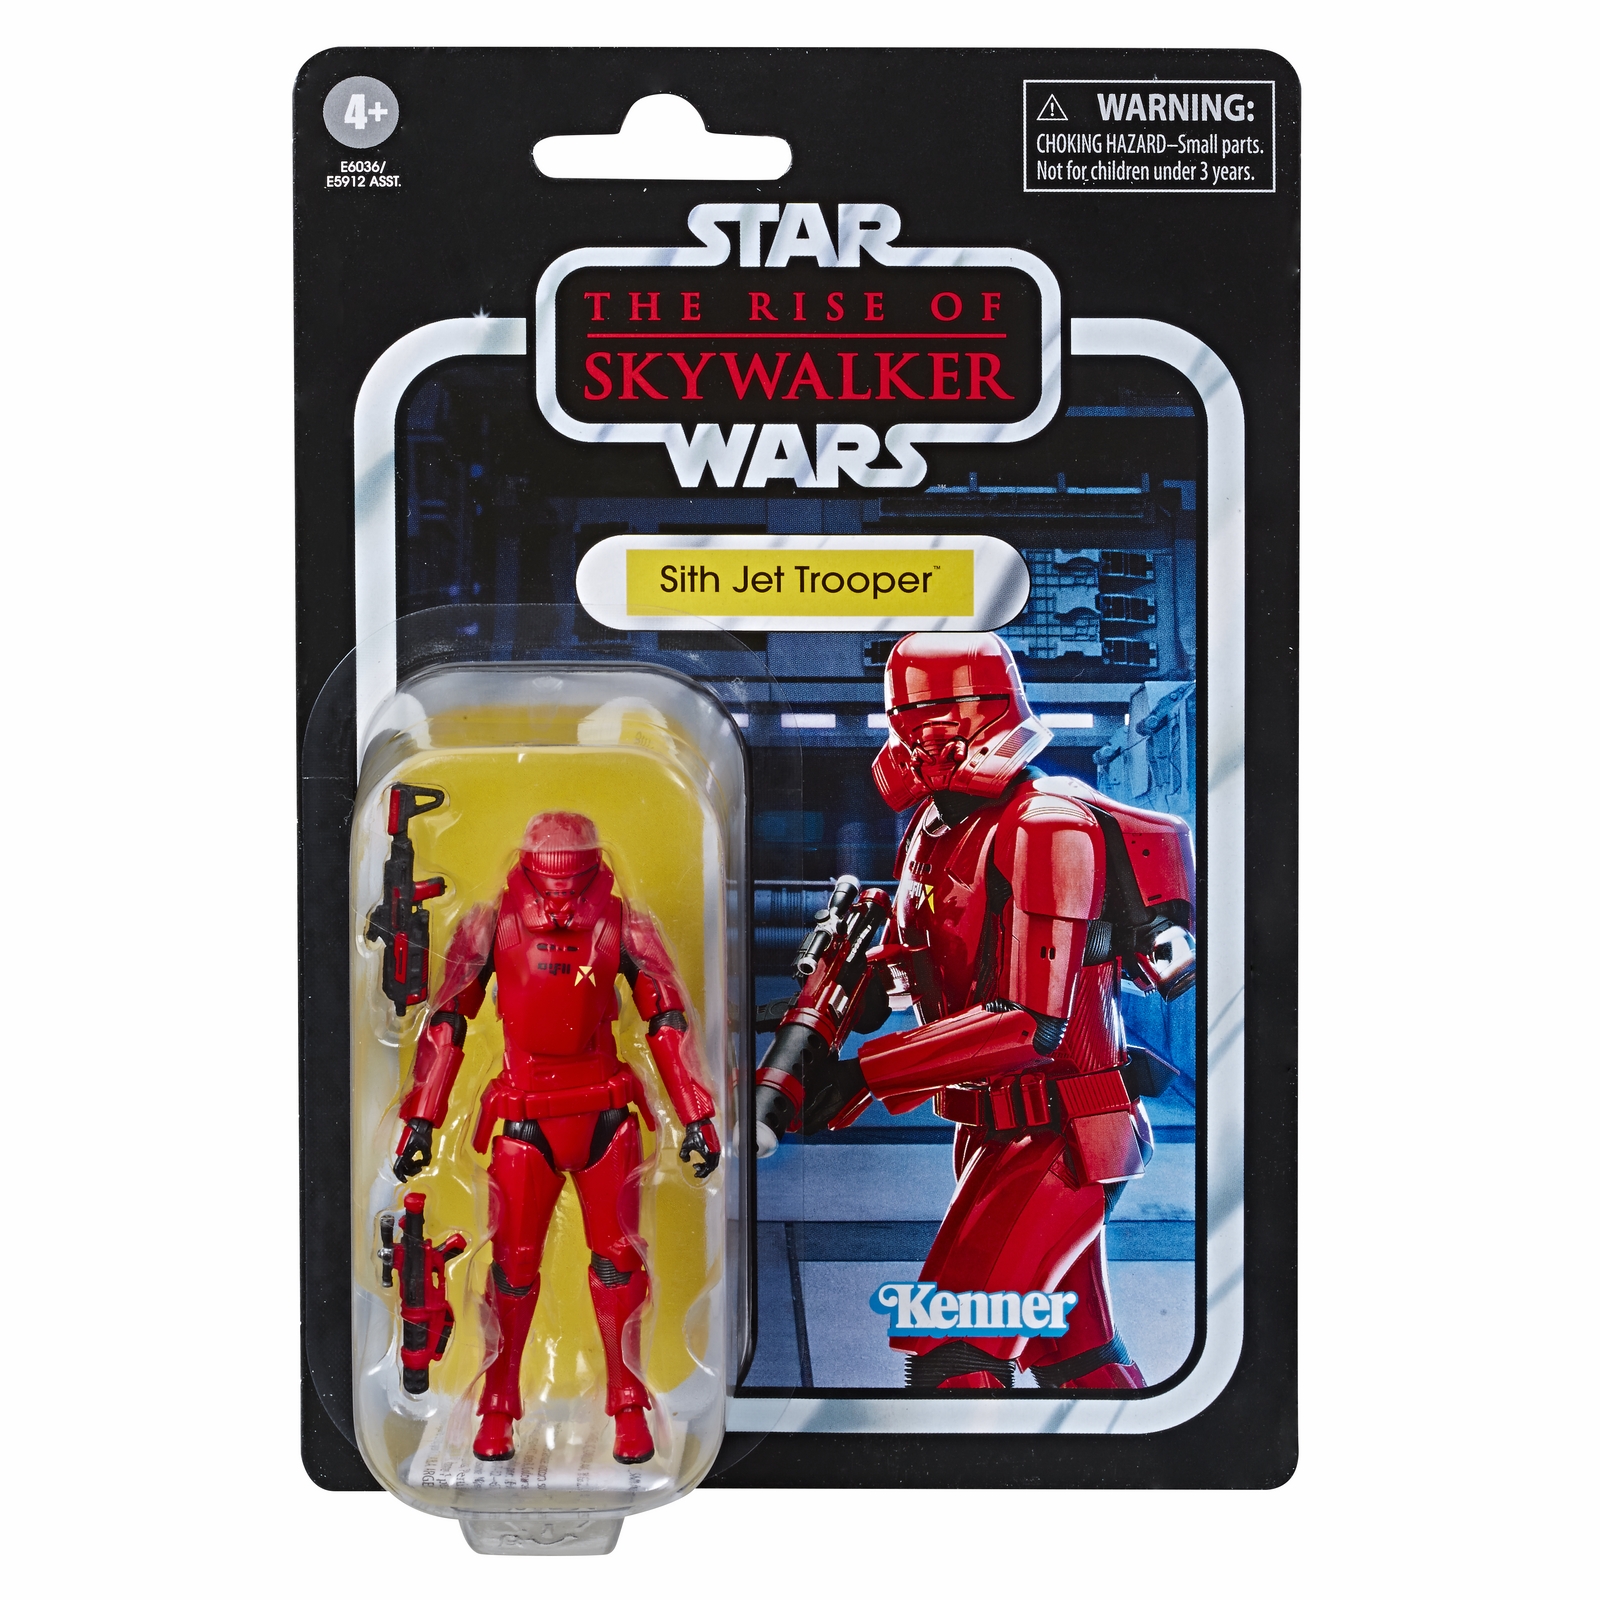 STAR WARS THE VINTAGE COLLECTION 3.75-INCH Figure Assortment SITH JET TROOPER - in pck.jpg